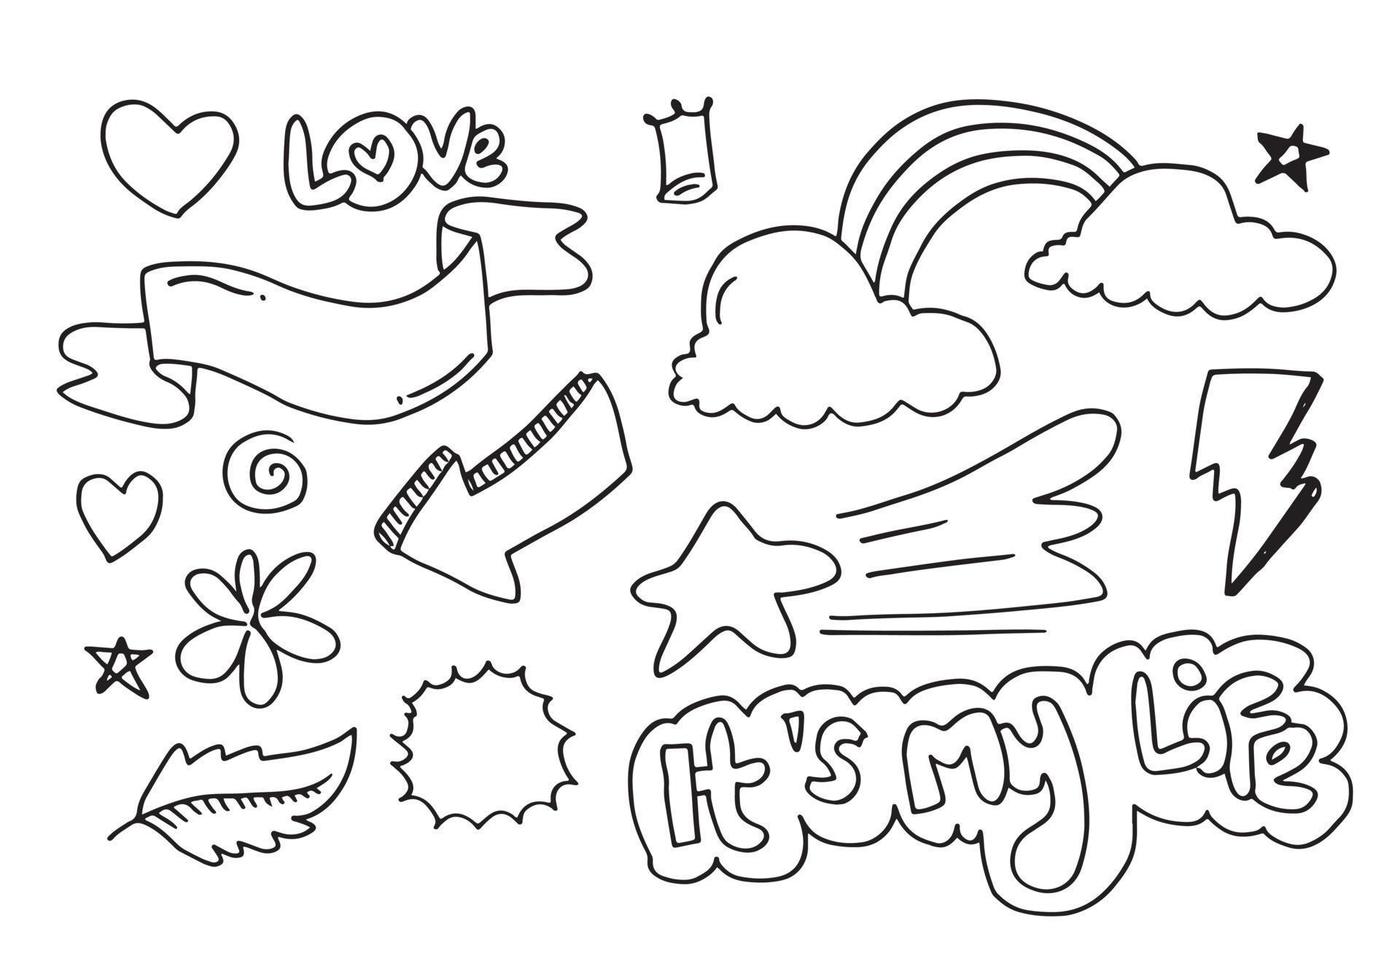 hand drawn set elements, black on white background. hearts, clouds, star, thunderbolt, swirls, leave, flower, arrows and,it's my life,love text for concept designs. vector